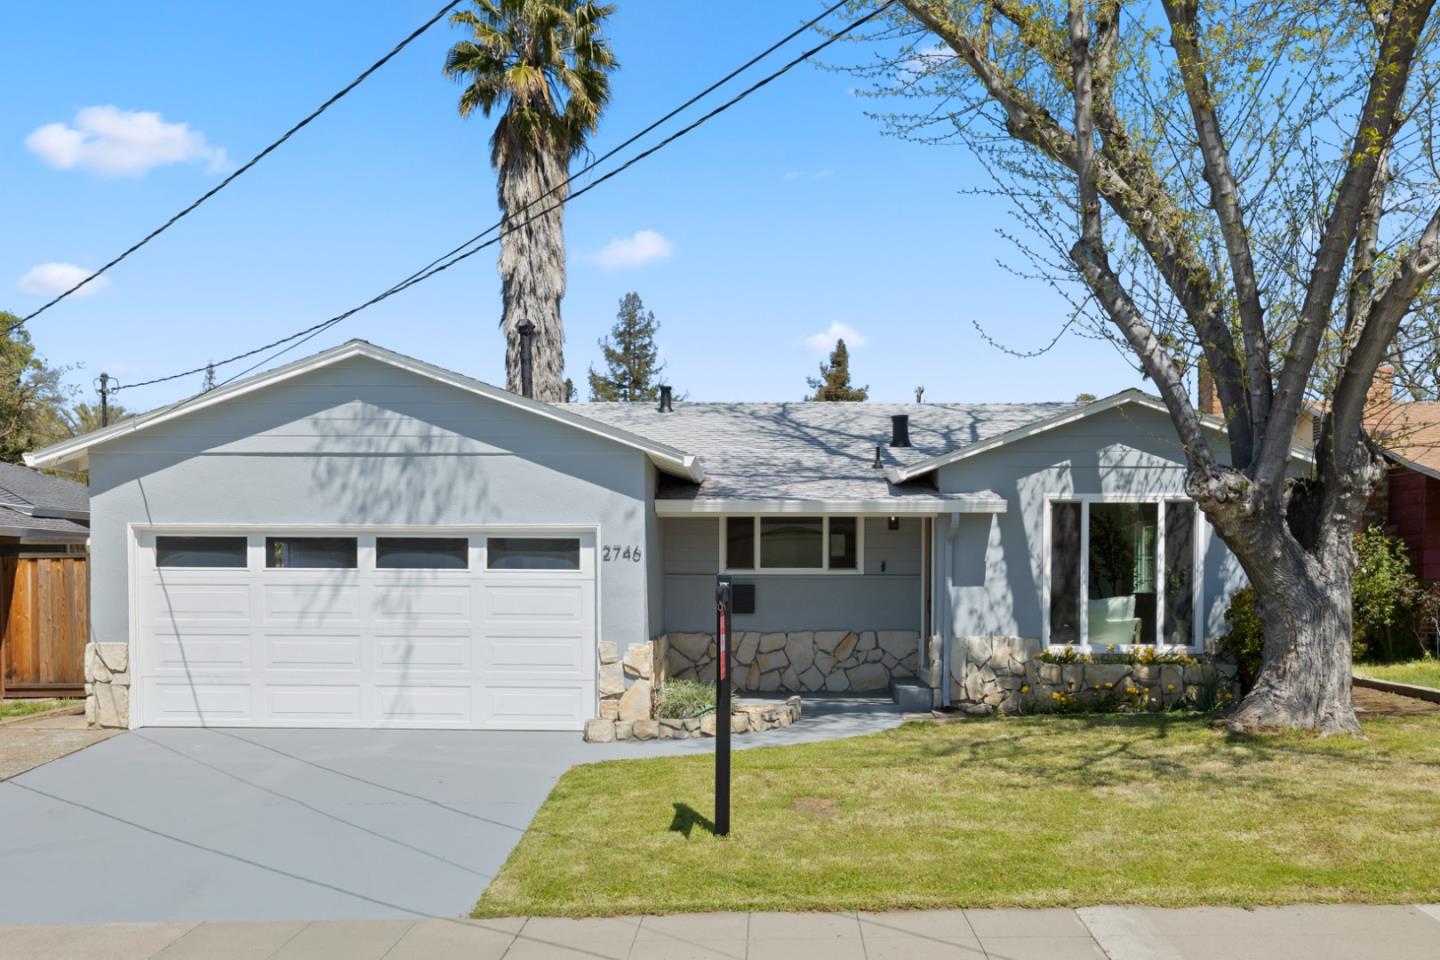 Photo of 2746 Kelly St in Livermore, CA